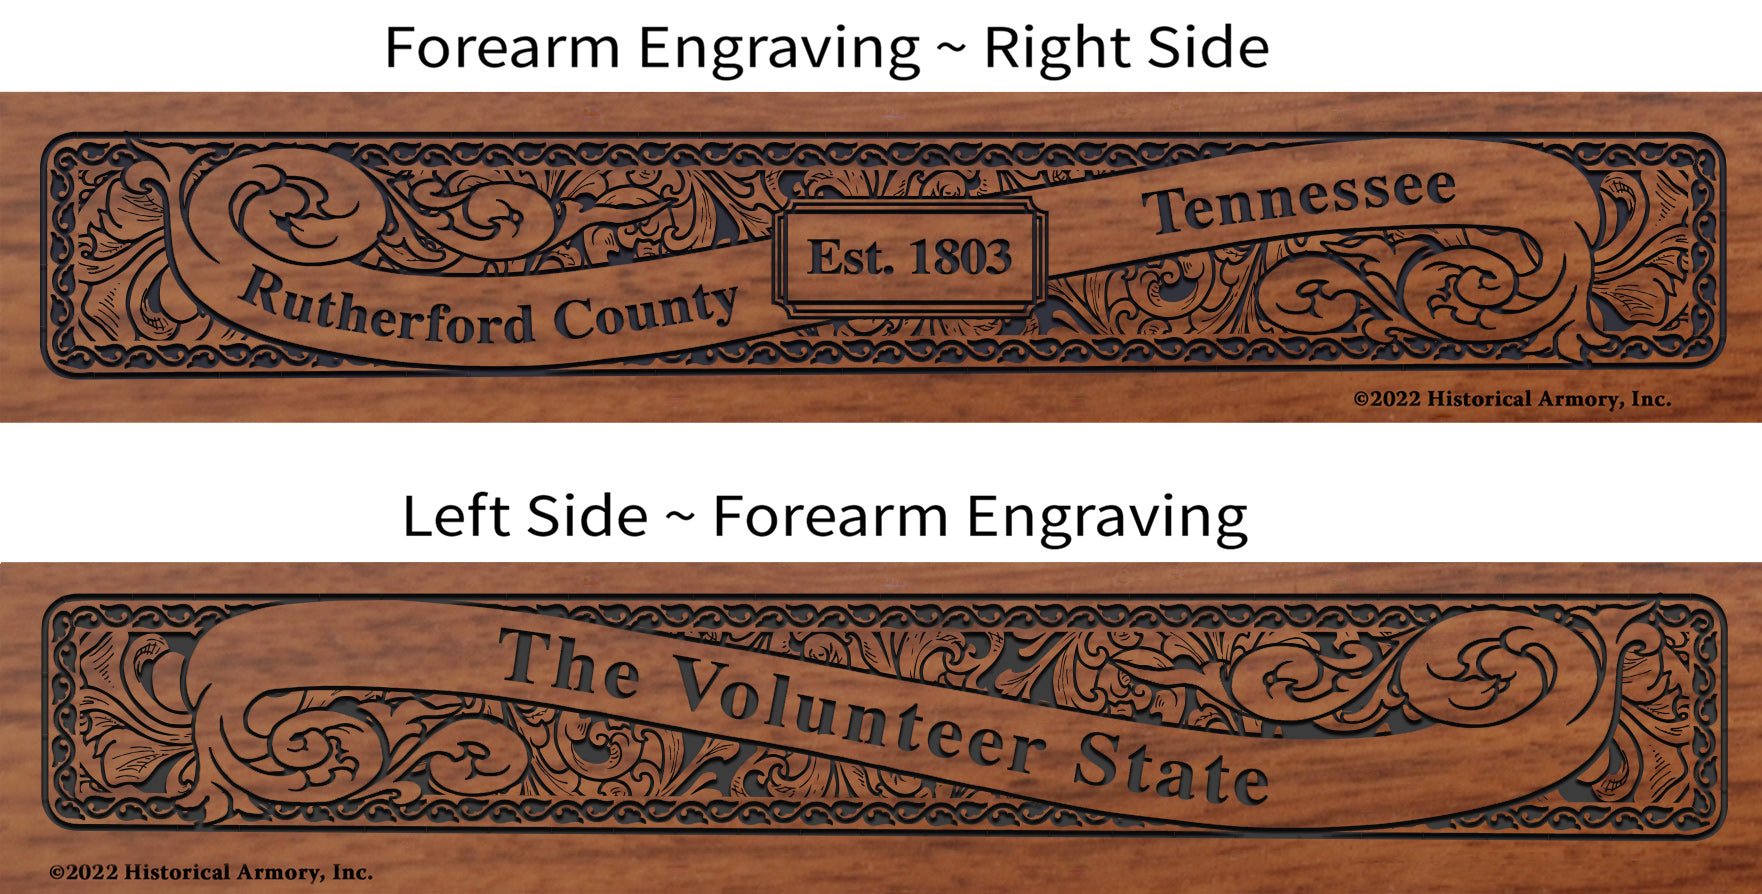 Rutherford County Tennessee Engraved Rifle Forearm